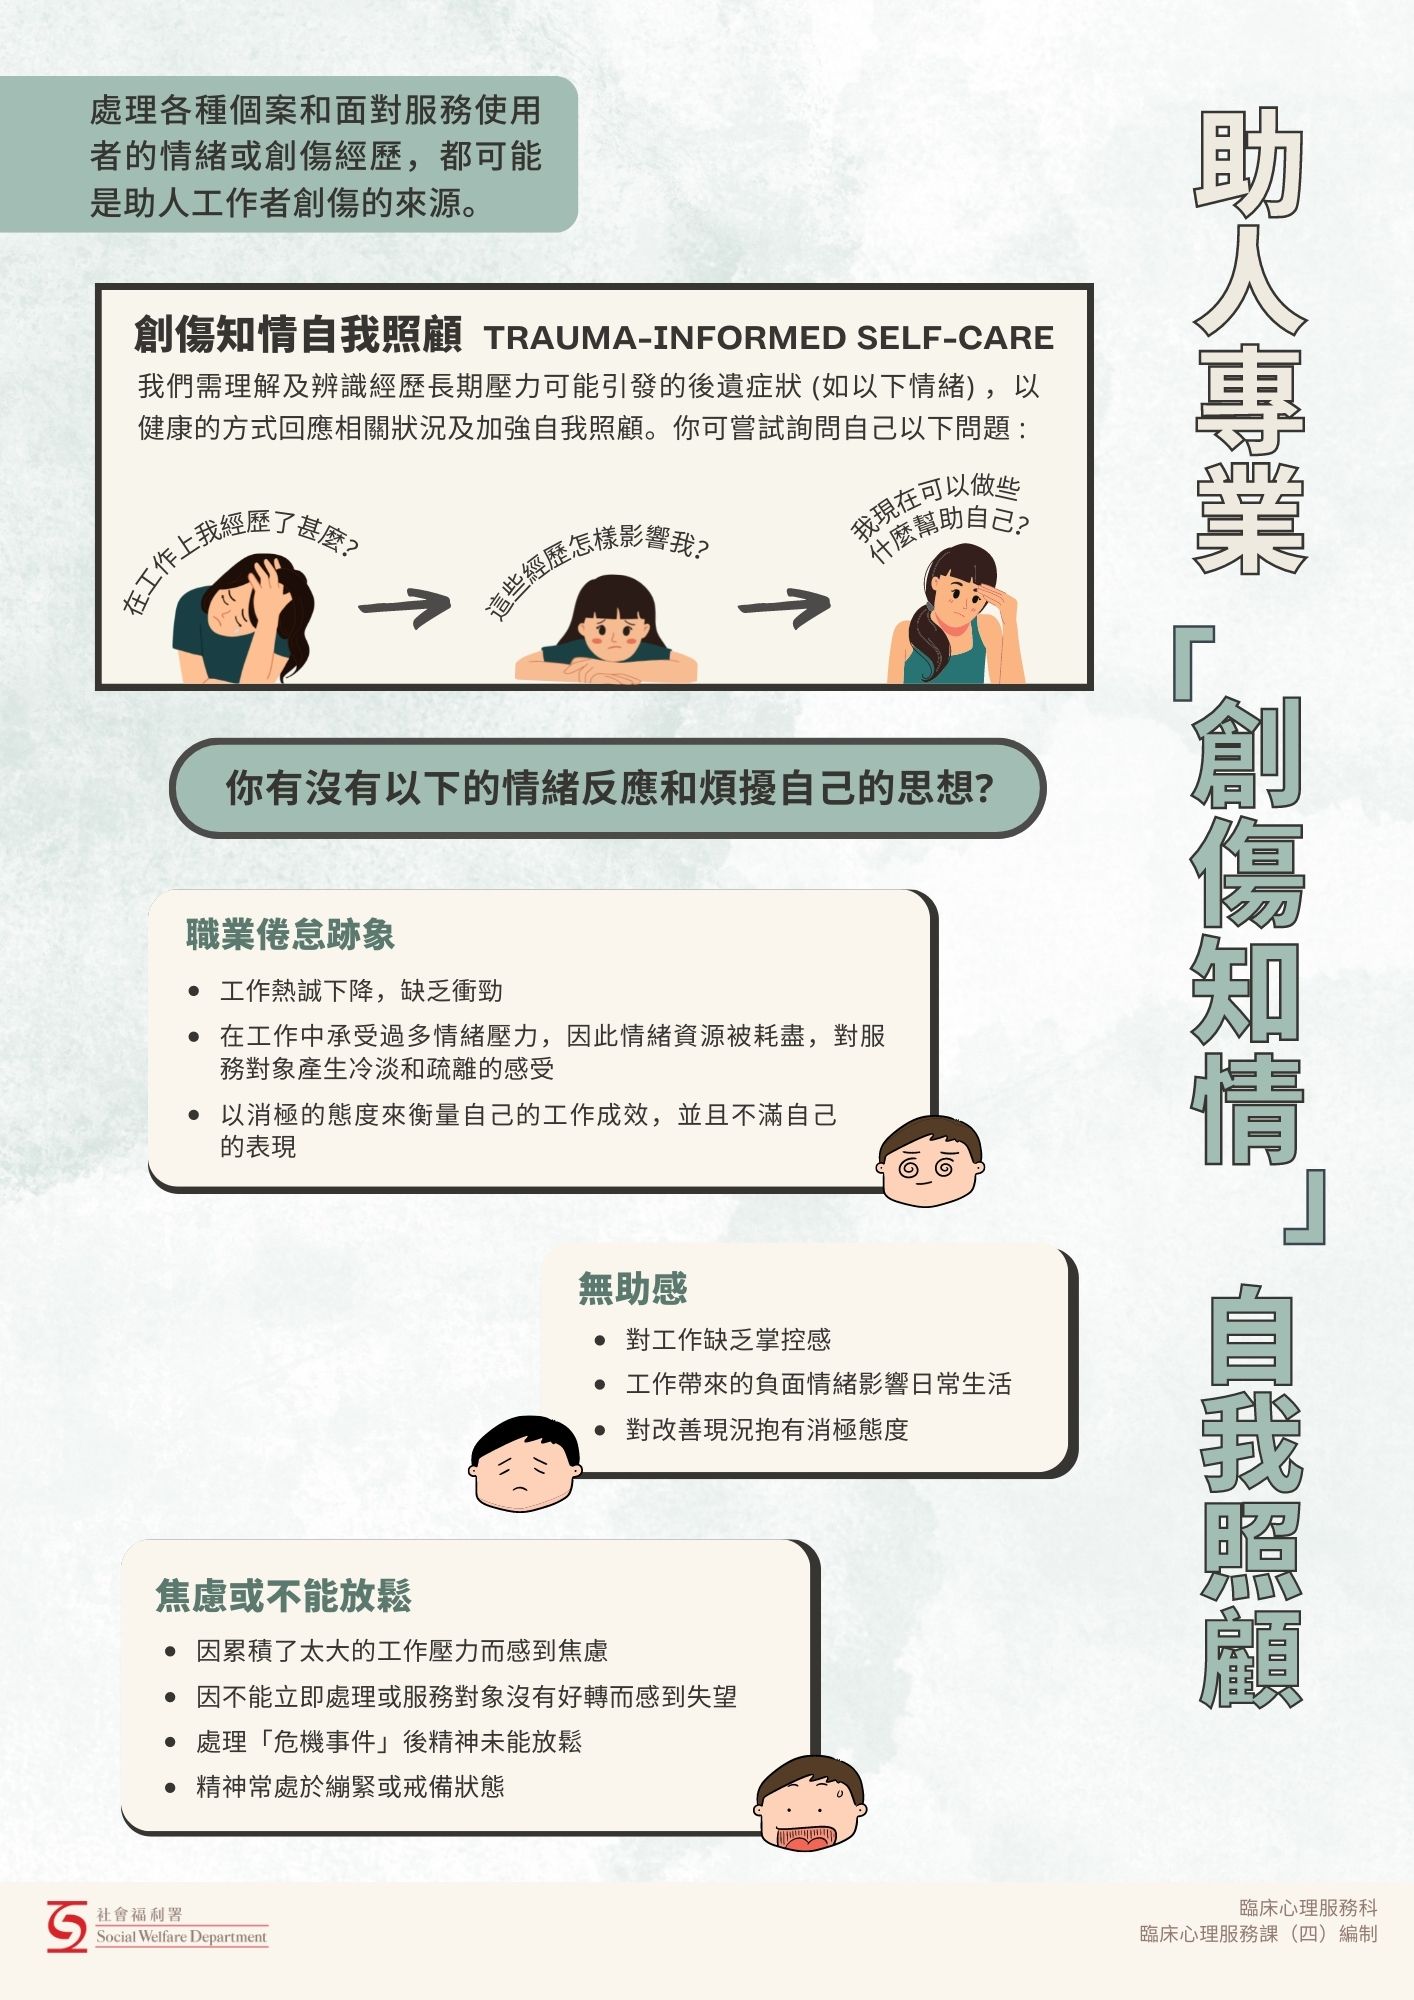 Trauma informed Self Care for Helping Professionals (Chinese Version Only)